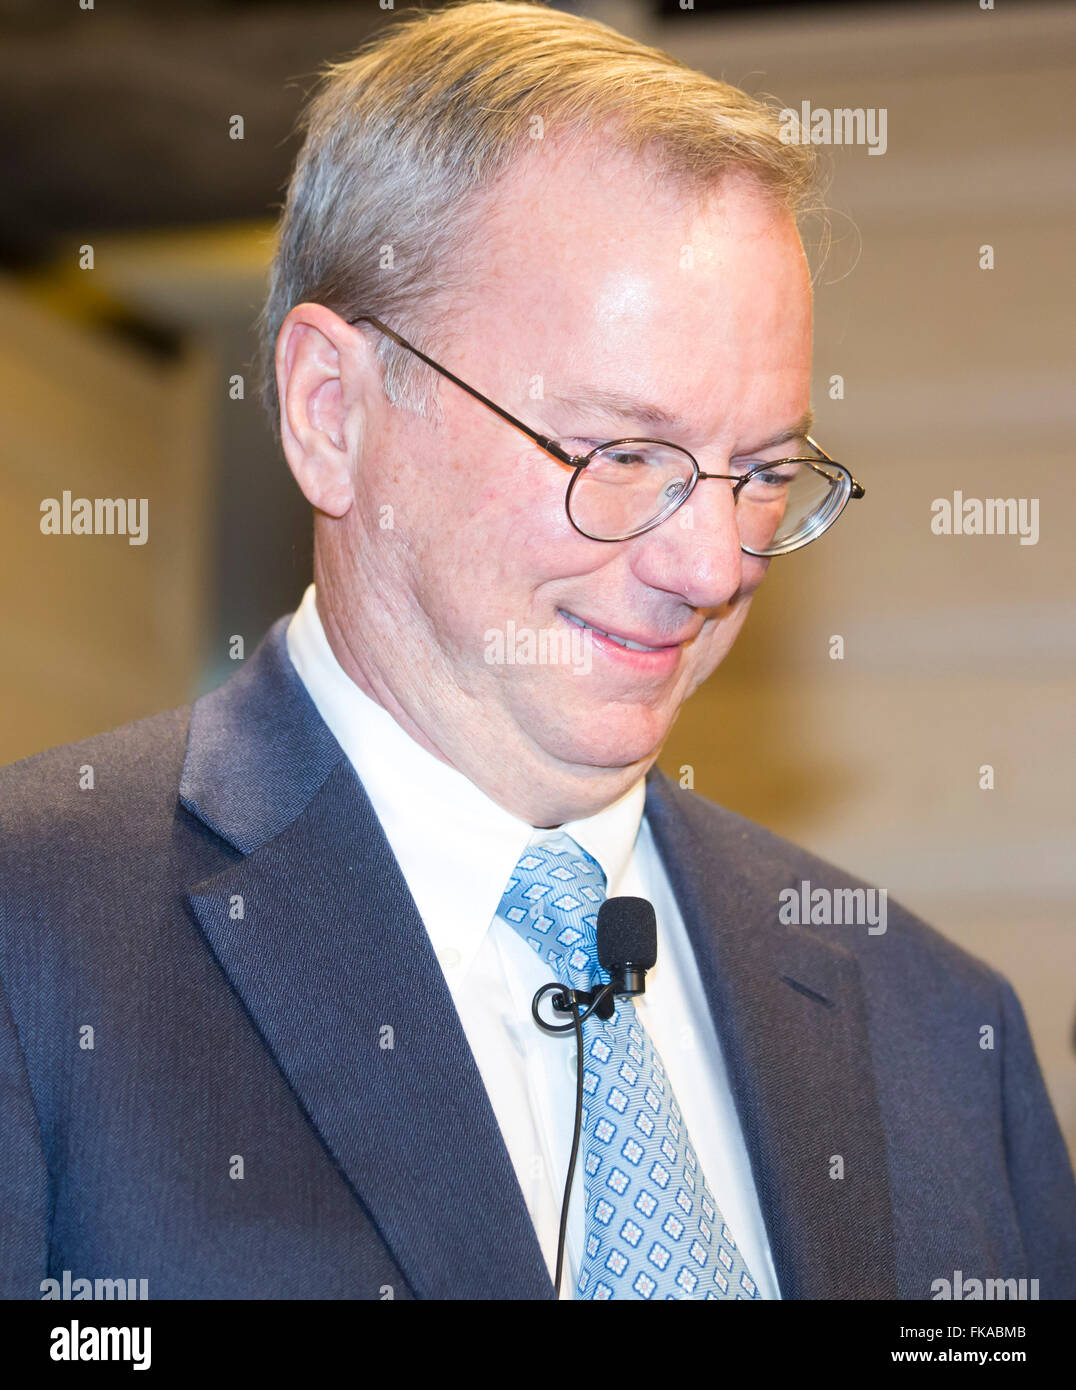 Seoul, South Korea. 8th March, 2016. Google Chairman Eric Schmidt arrives for a pre-match press conference in Seoul, South Korea. The historic human-computer showdown in the ancient board game Go begins on Wednesday in Seoul, with the winner's prize of US$1 million at stake. The matches will be also held at the same place on Thursday, Saturday and Sunday and will end next Tuesday. The prize will be donated to UNICEF and other charities, if AlphaGo wins, local media reported. Credit:  Lee Jae-Won/AFLO/Alamy Live News Stock Photo